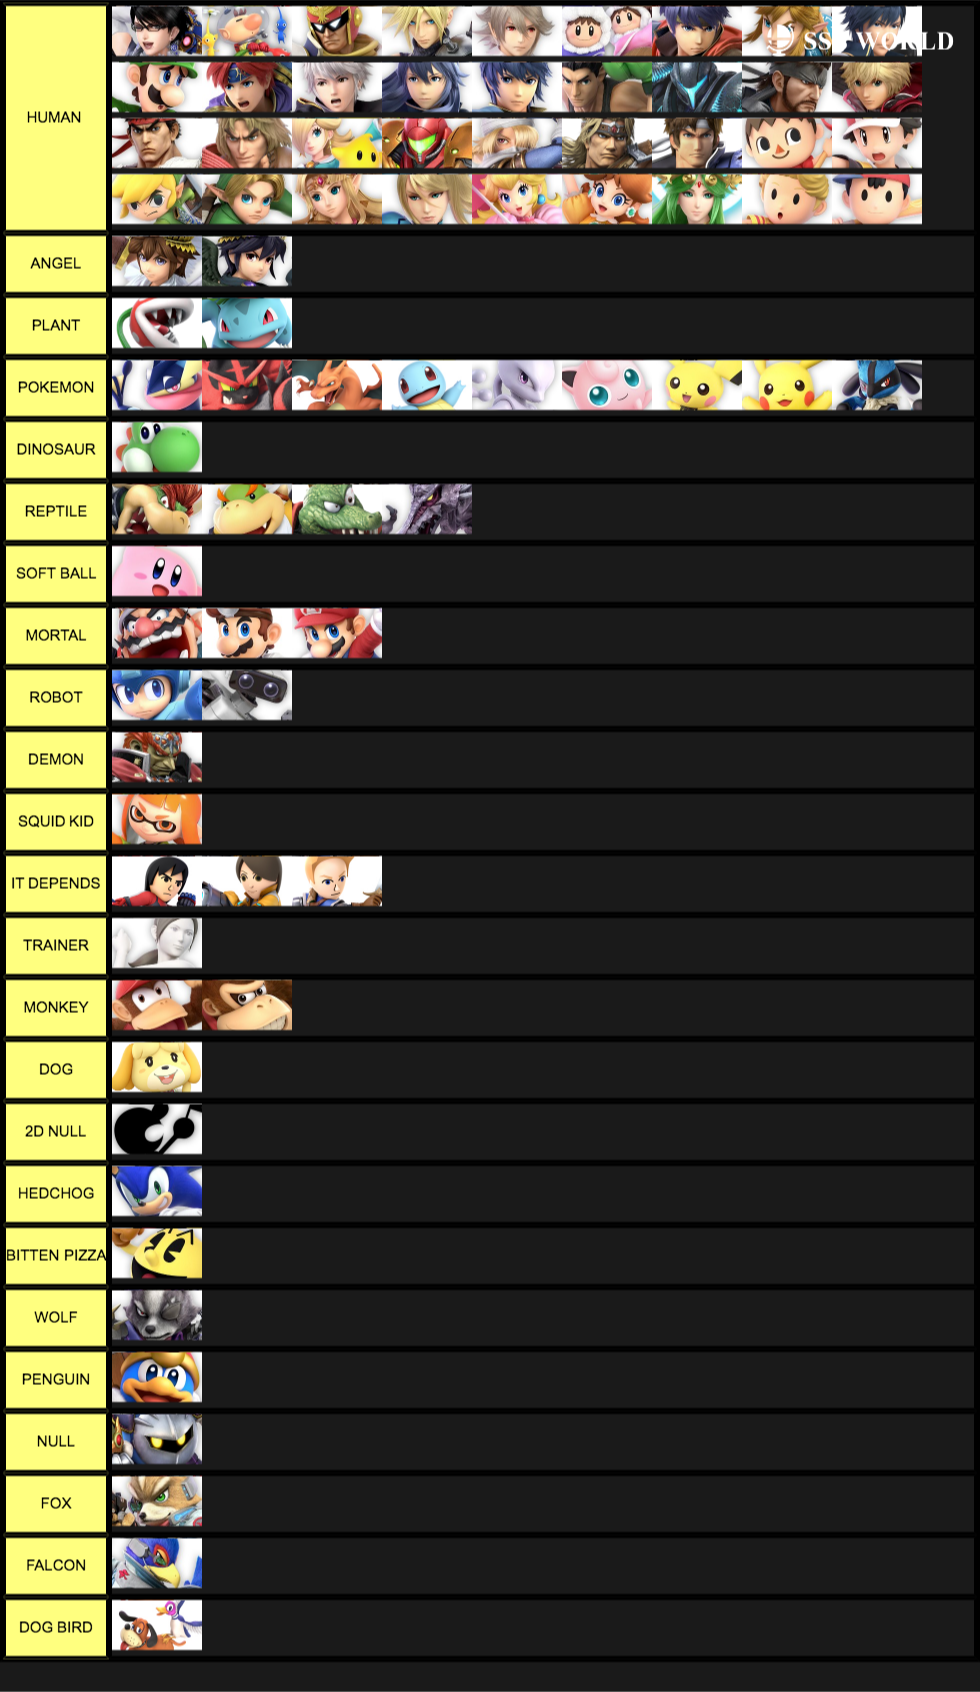 WHICH ANIMAL IS EACH CHARACTER LIST